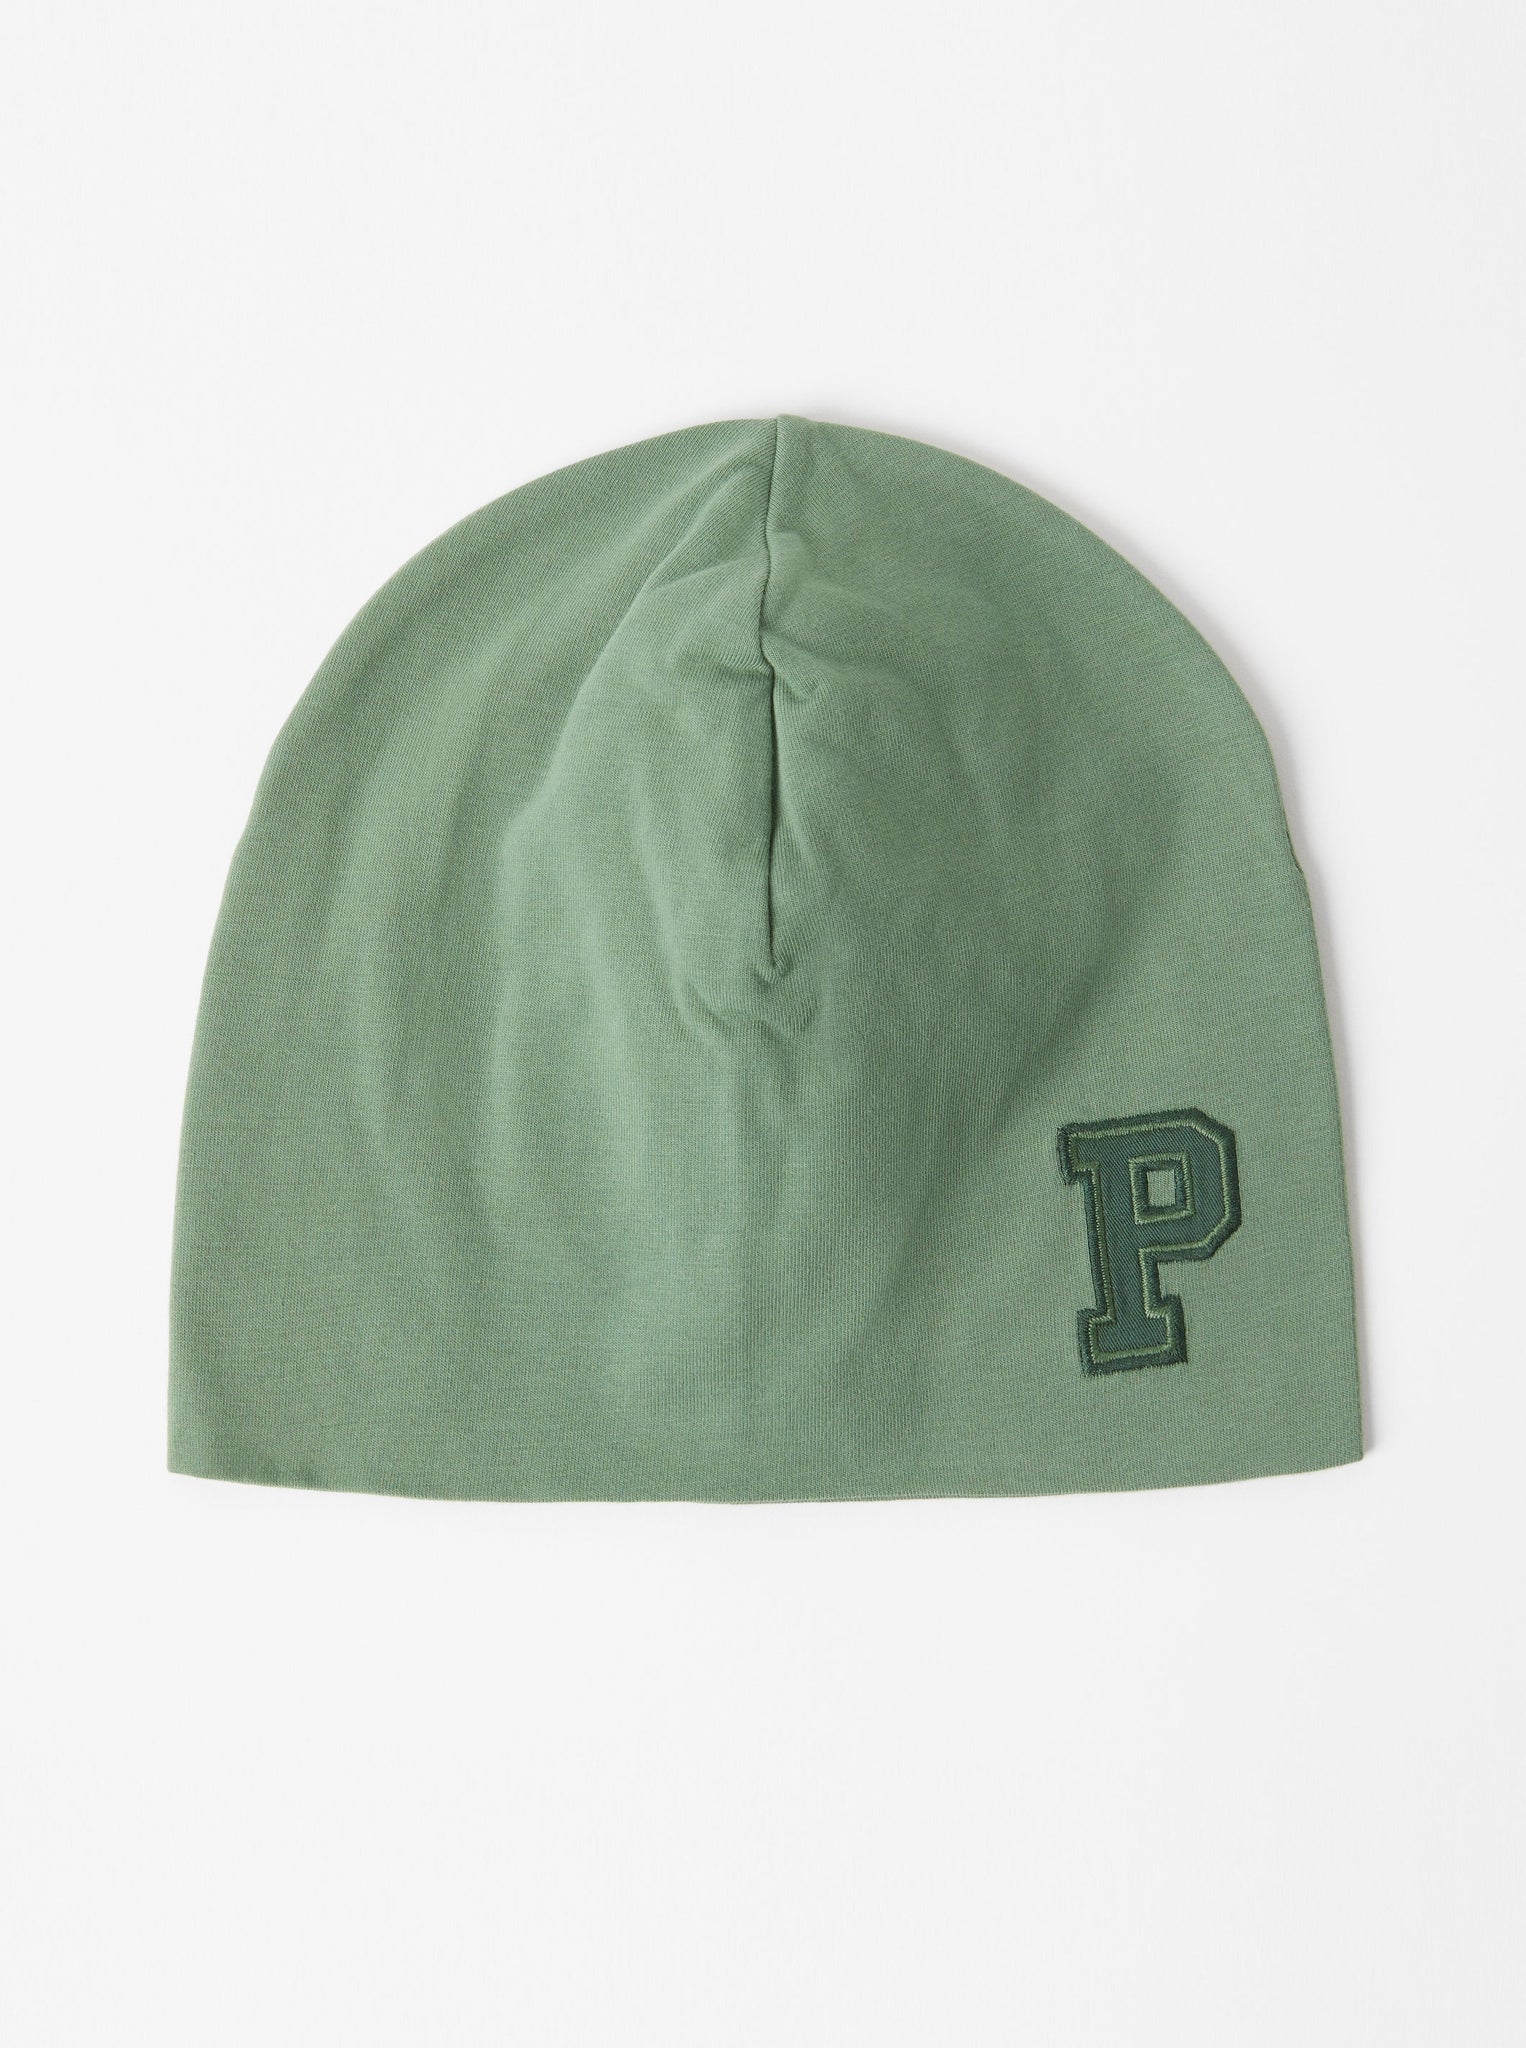 Organic Cotton Green Kids Beanie from the Polarn O. Pyret kidswear collection. Sustainably produced kids outerwear.